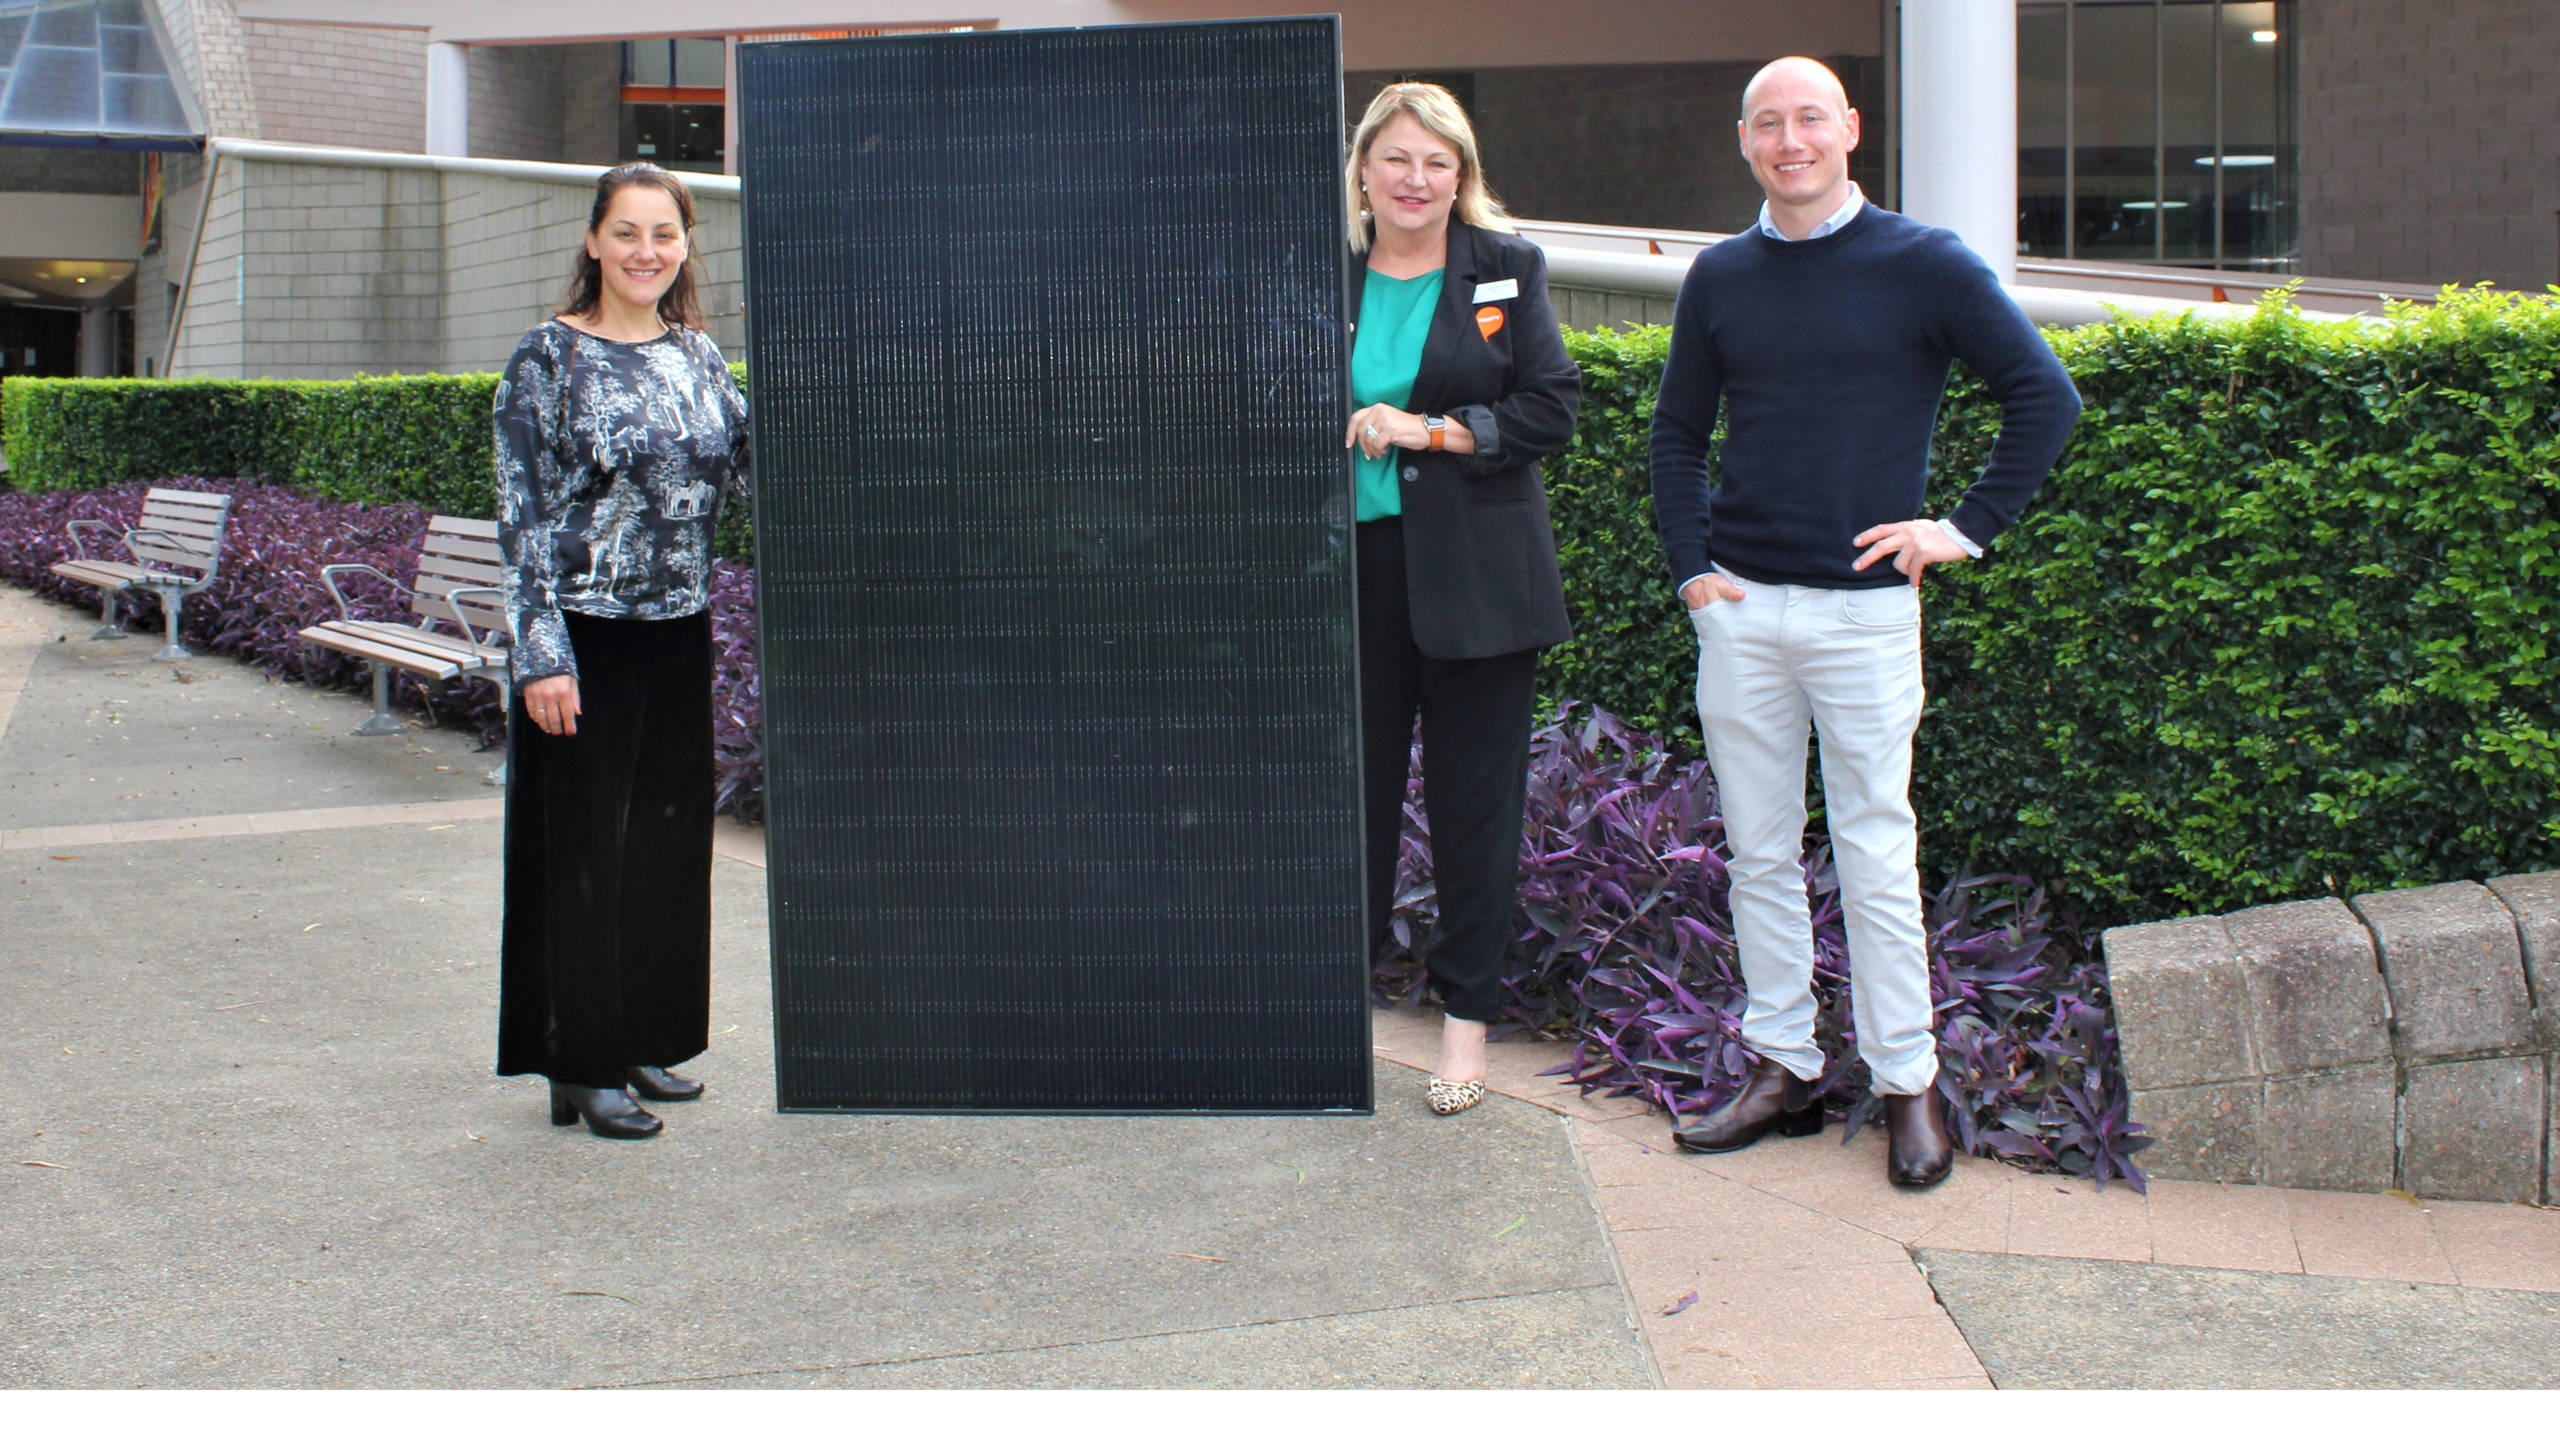 Manager Sustainability and Environment at Endeavour Energy, Gina Pavlovic, Penrith Mayor Tricia Hitchen and AEF’s NSW Account Manager Energy Services for Households, Angus Taylor, met in Penrith to discuss the Energy Concierge program.